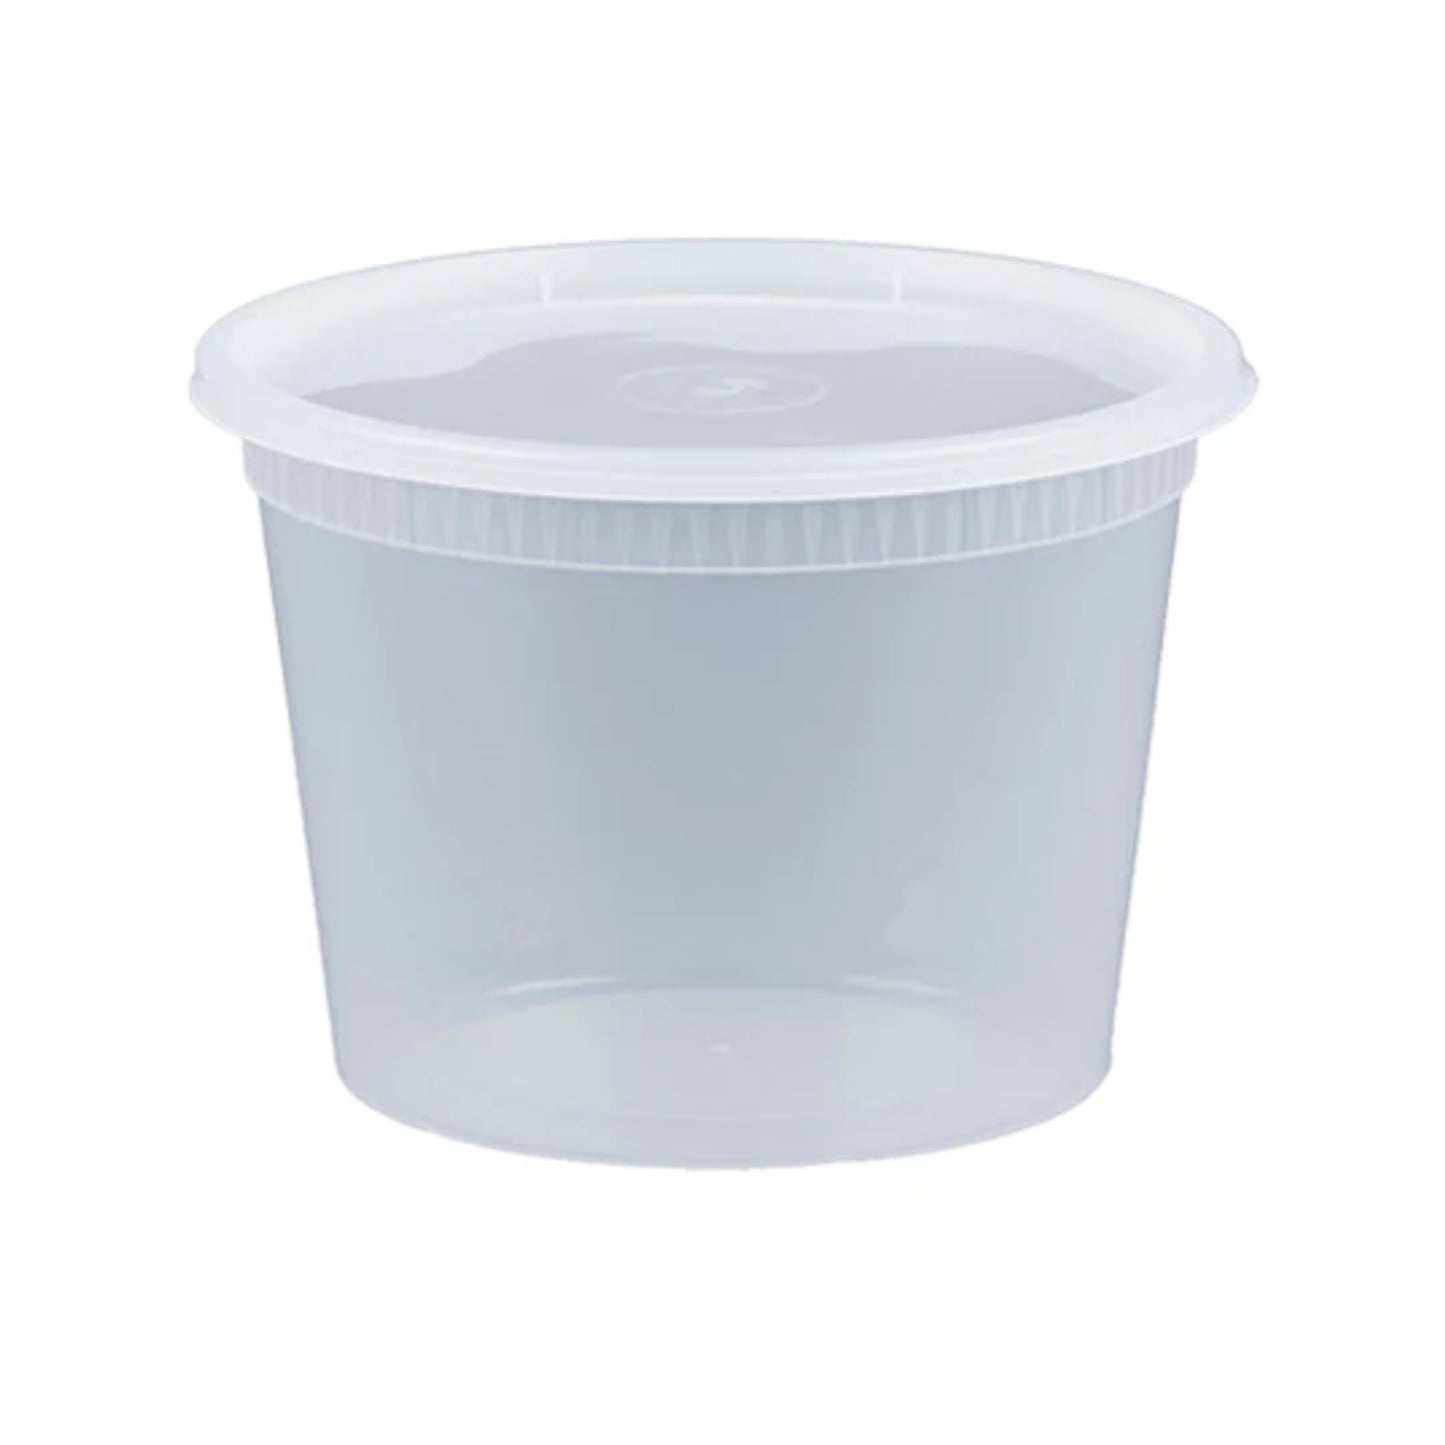 KIS-S16G | 240sets 16oz, 473ml Clear Plastic Deli Containers and Lids Combo; $0.156/set